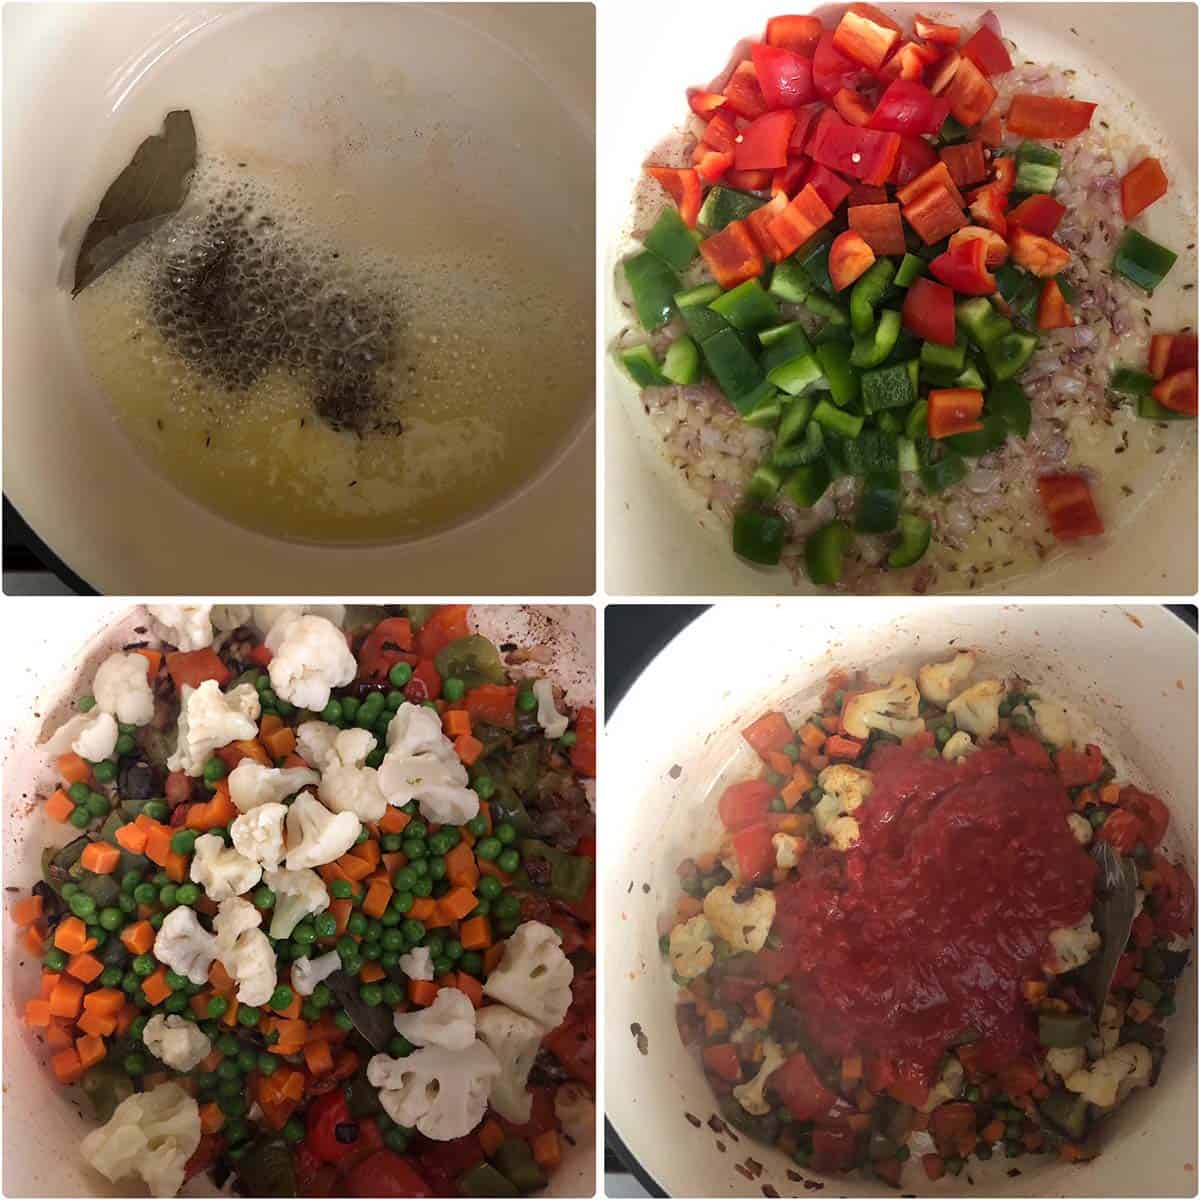 4 panel photo showing the sautéing of spices, veggies and tomato puree.